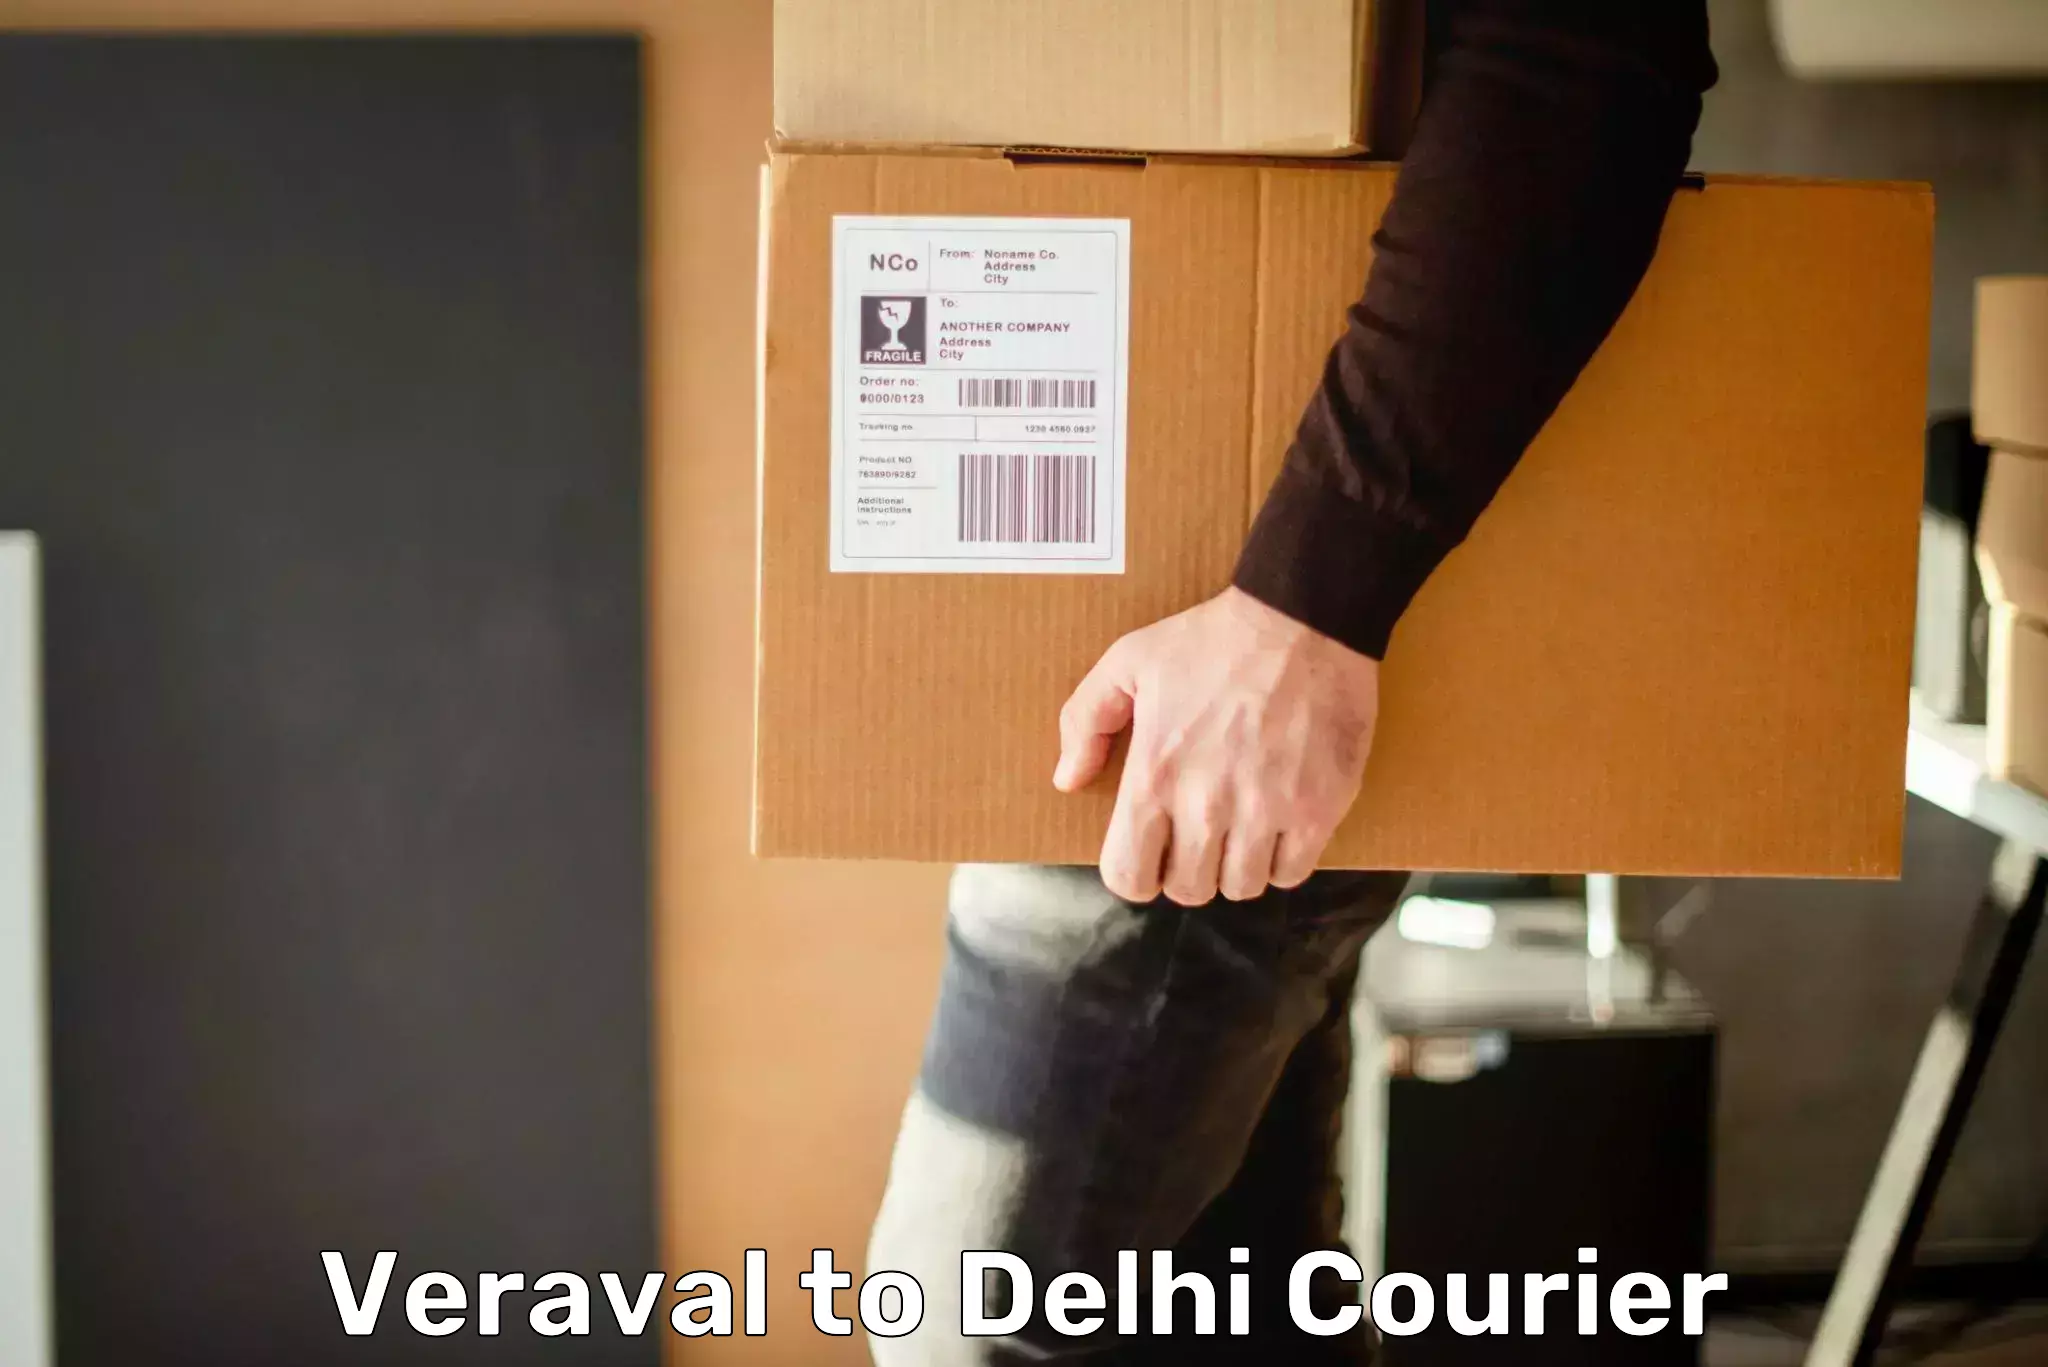 Tech-enabled shipping Veraval to Delhi